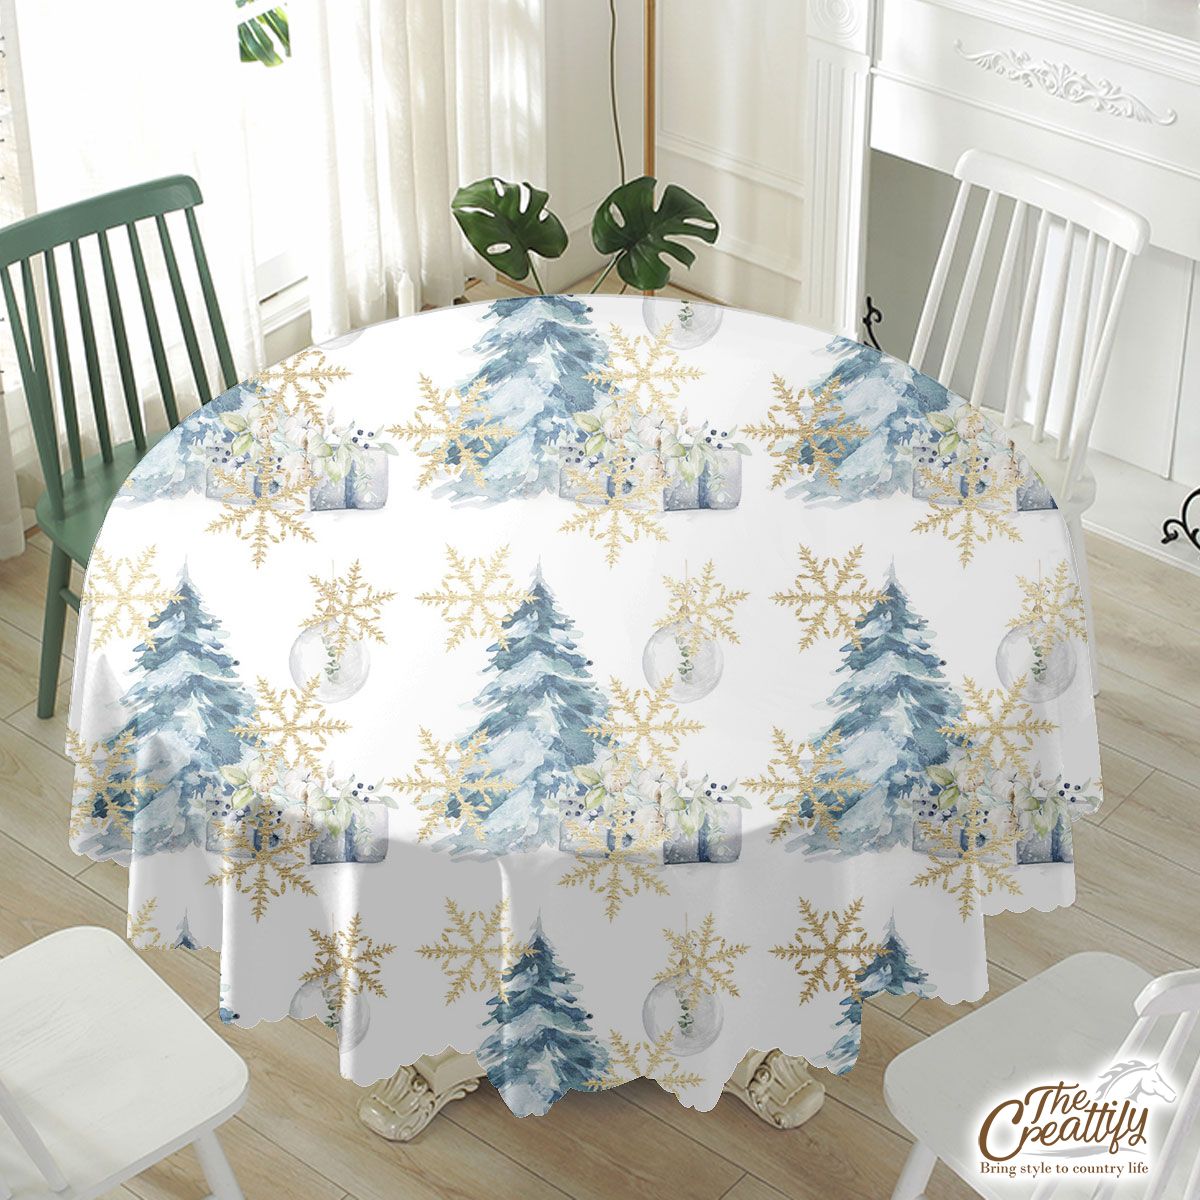 Chistmas Gifts, Gold Snowflake Clipart, Pine Tree And Chistmas Balls Seamless White Pattern Waterproof Tablecloth